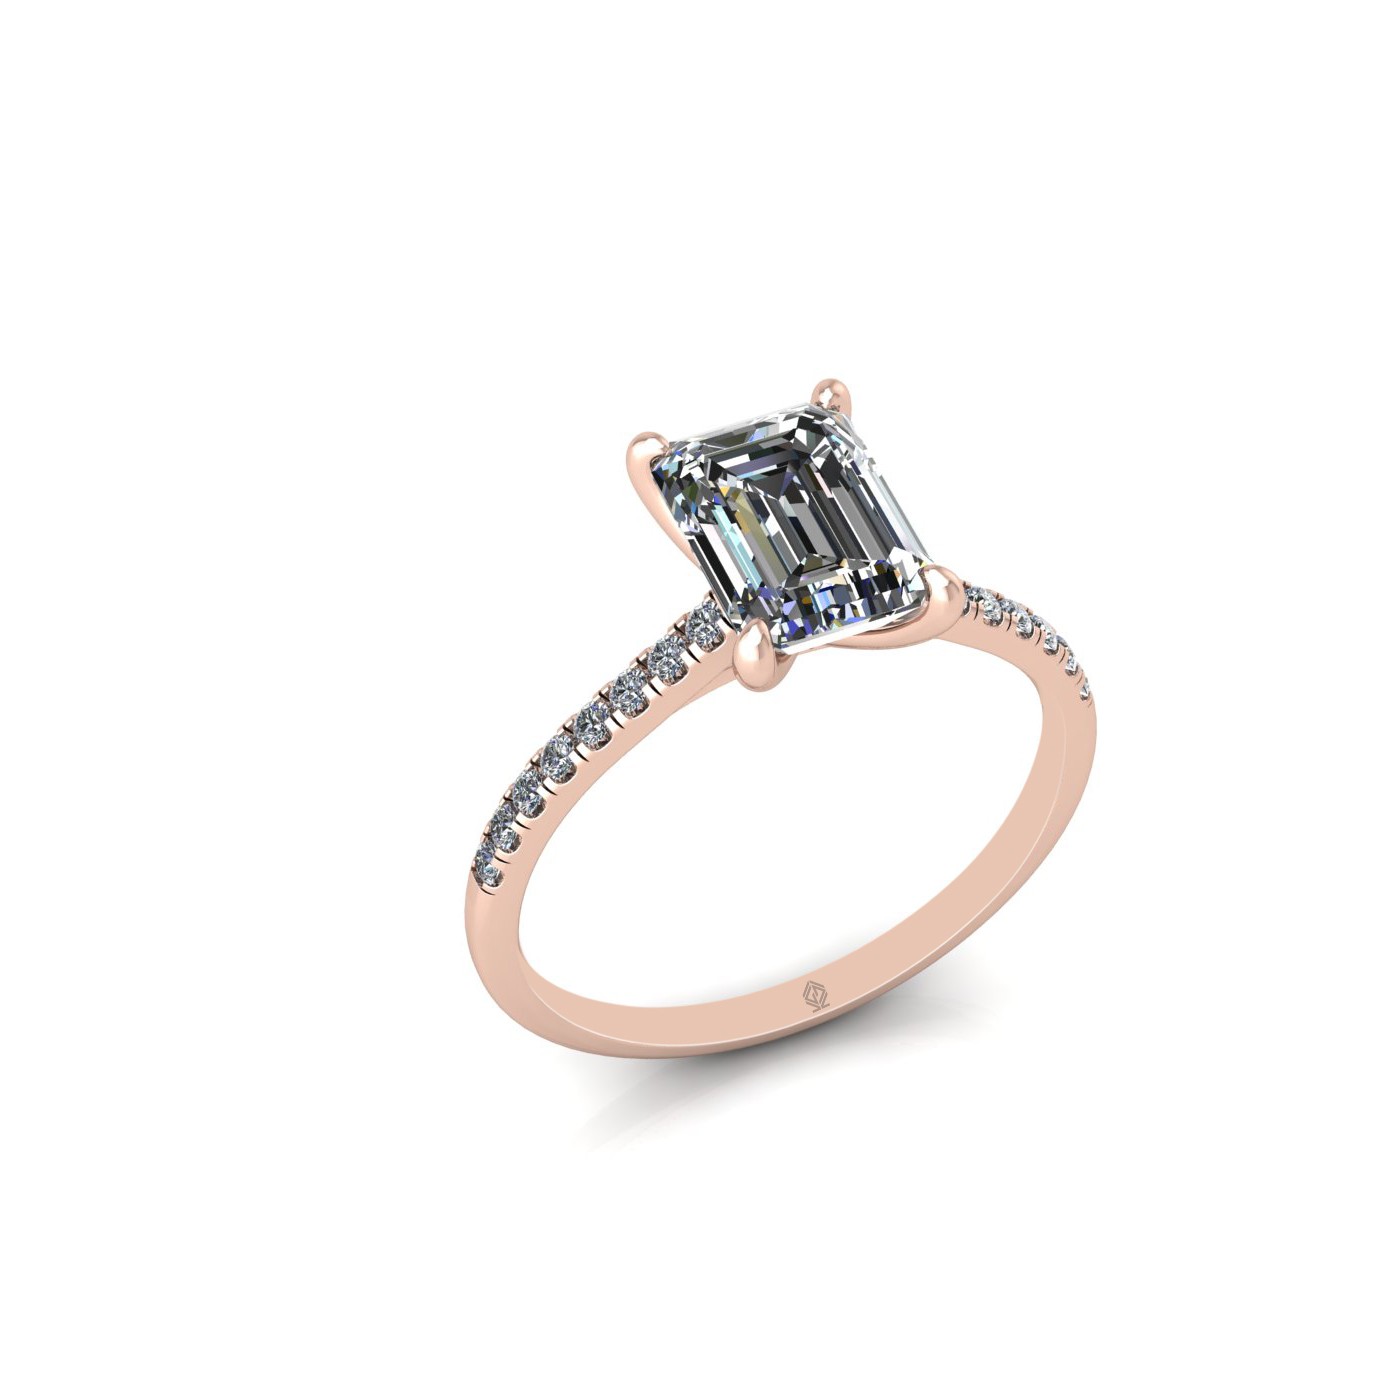 18k rose gold 1.5ct 4 prongs emerald cut diamond engagement ring with whisper thin pavÉ set band Photos & images